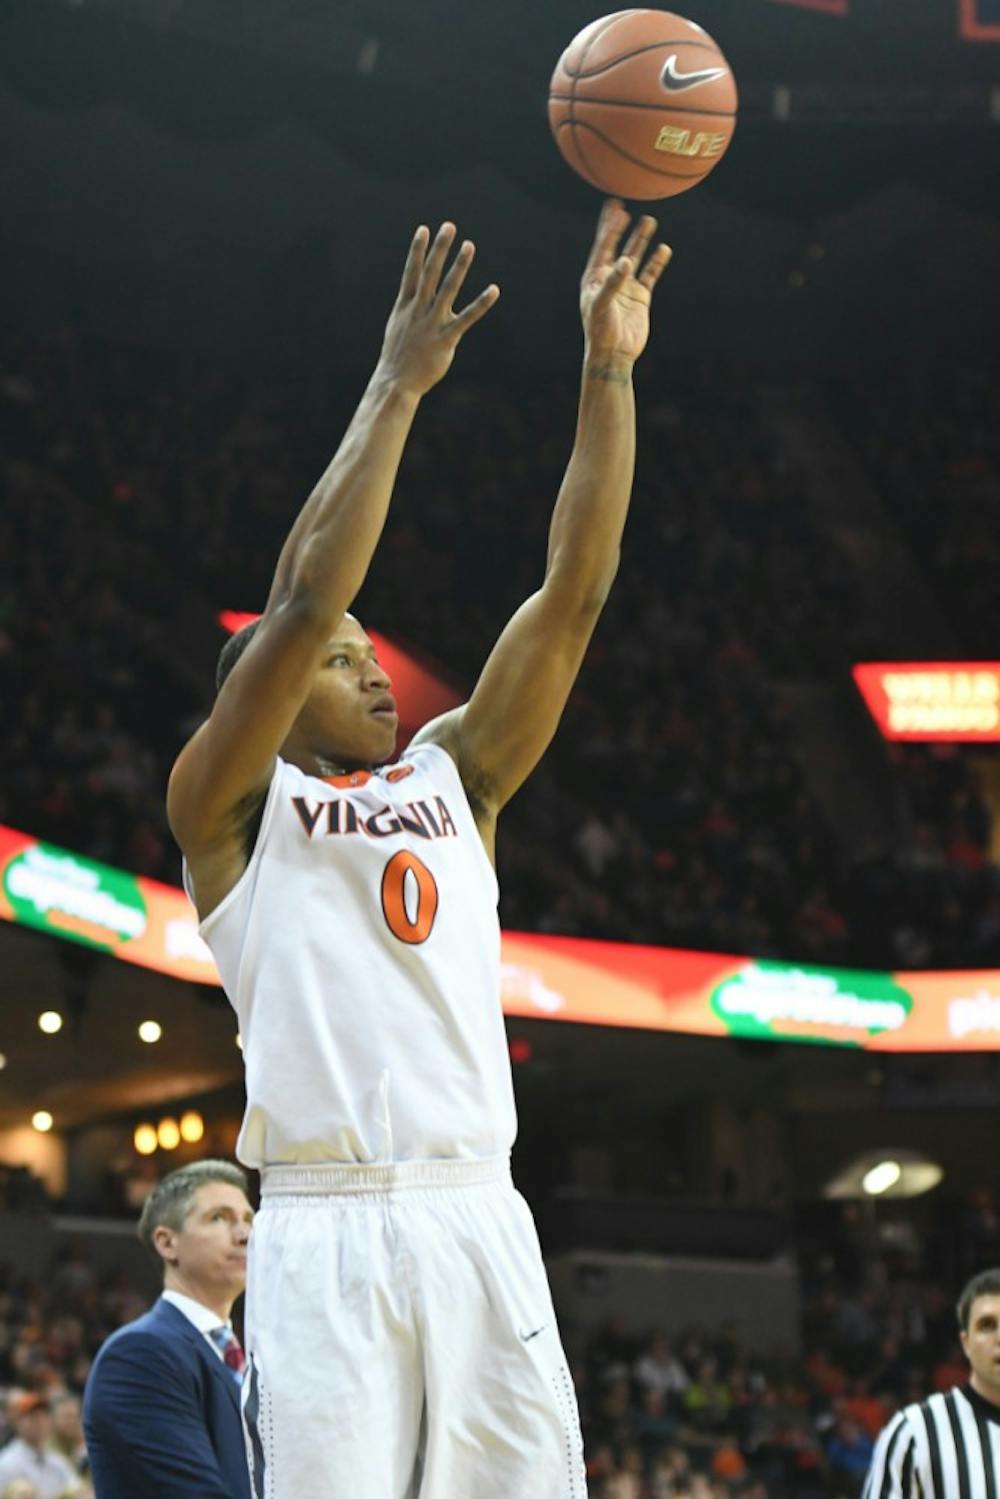 <p>Junior guard Devon Hall led the Cavaliers with&nbsp;10 points and six rebounds as they dominated No. 6 Louisville on the road.&nbsp;</p>